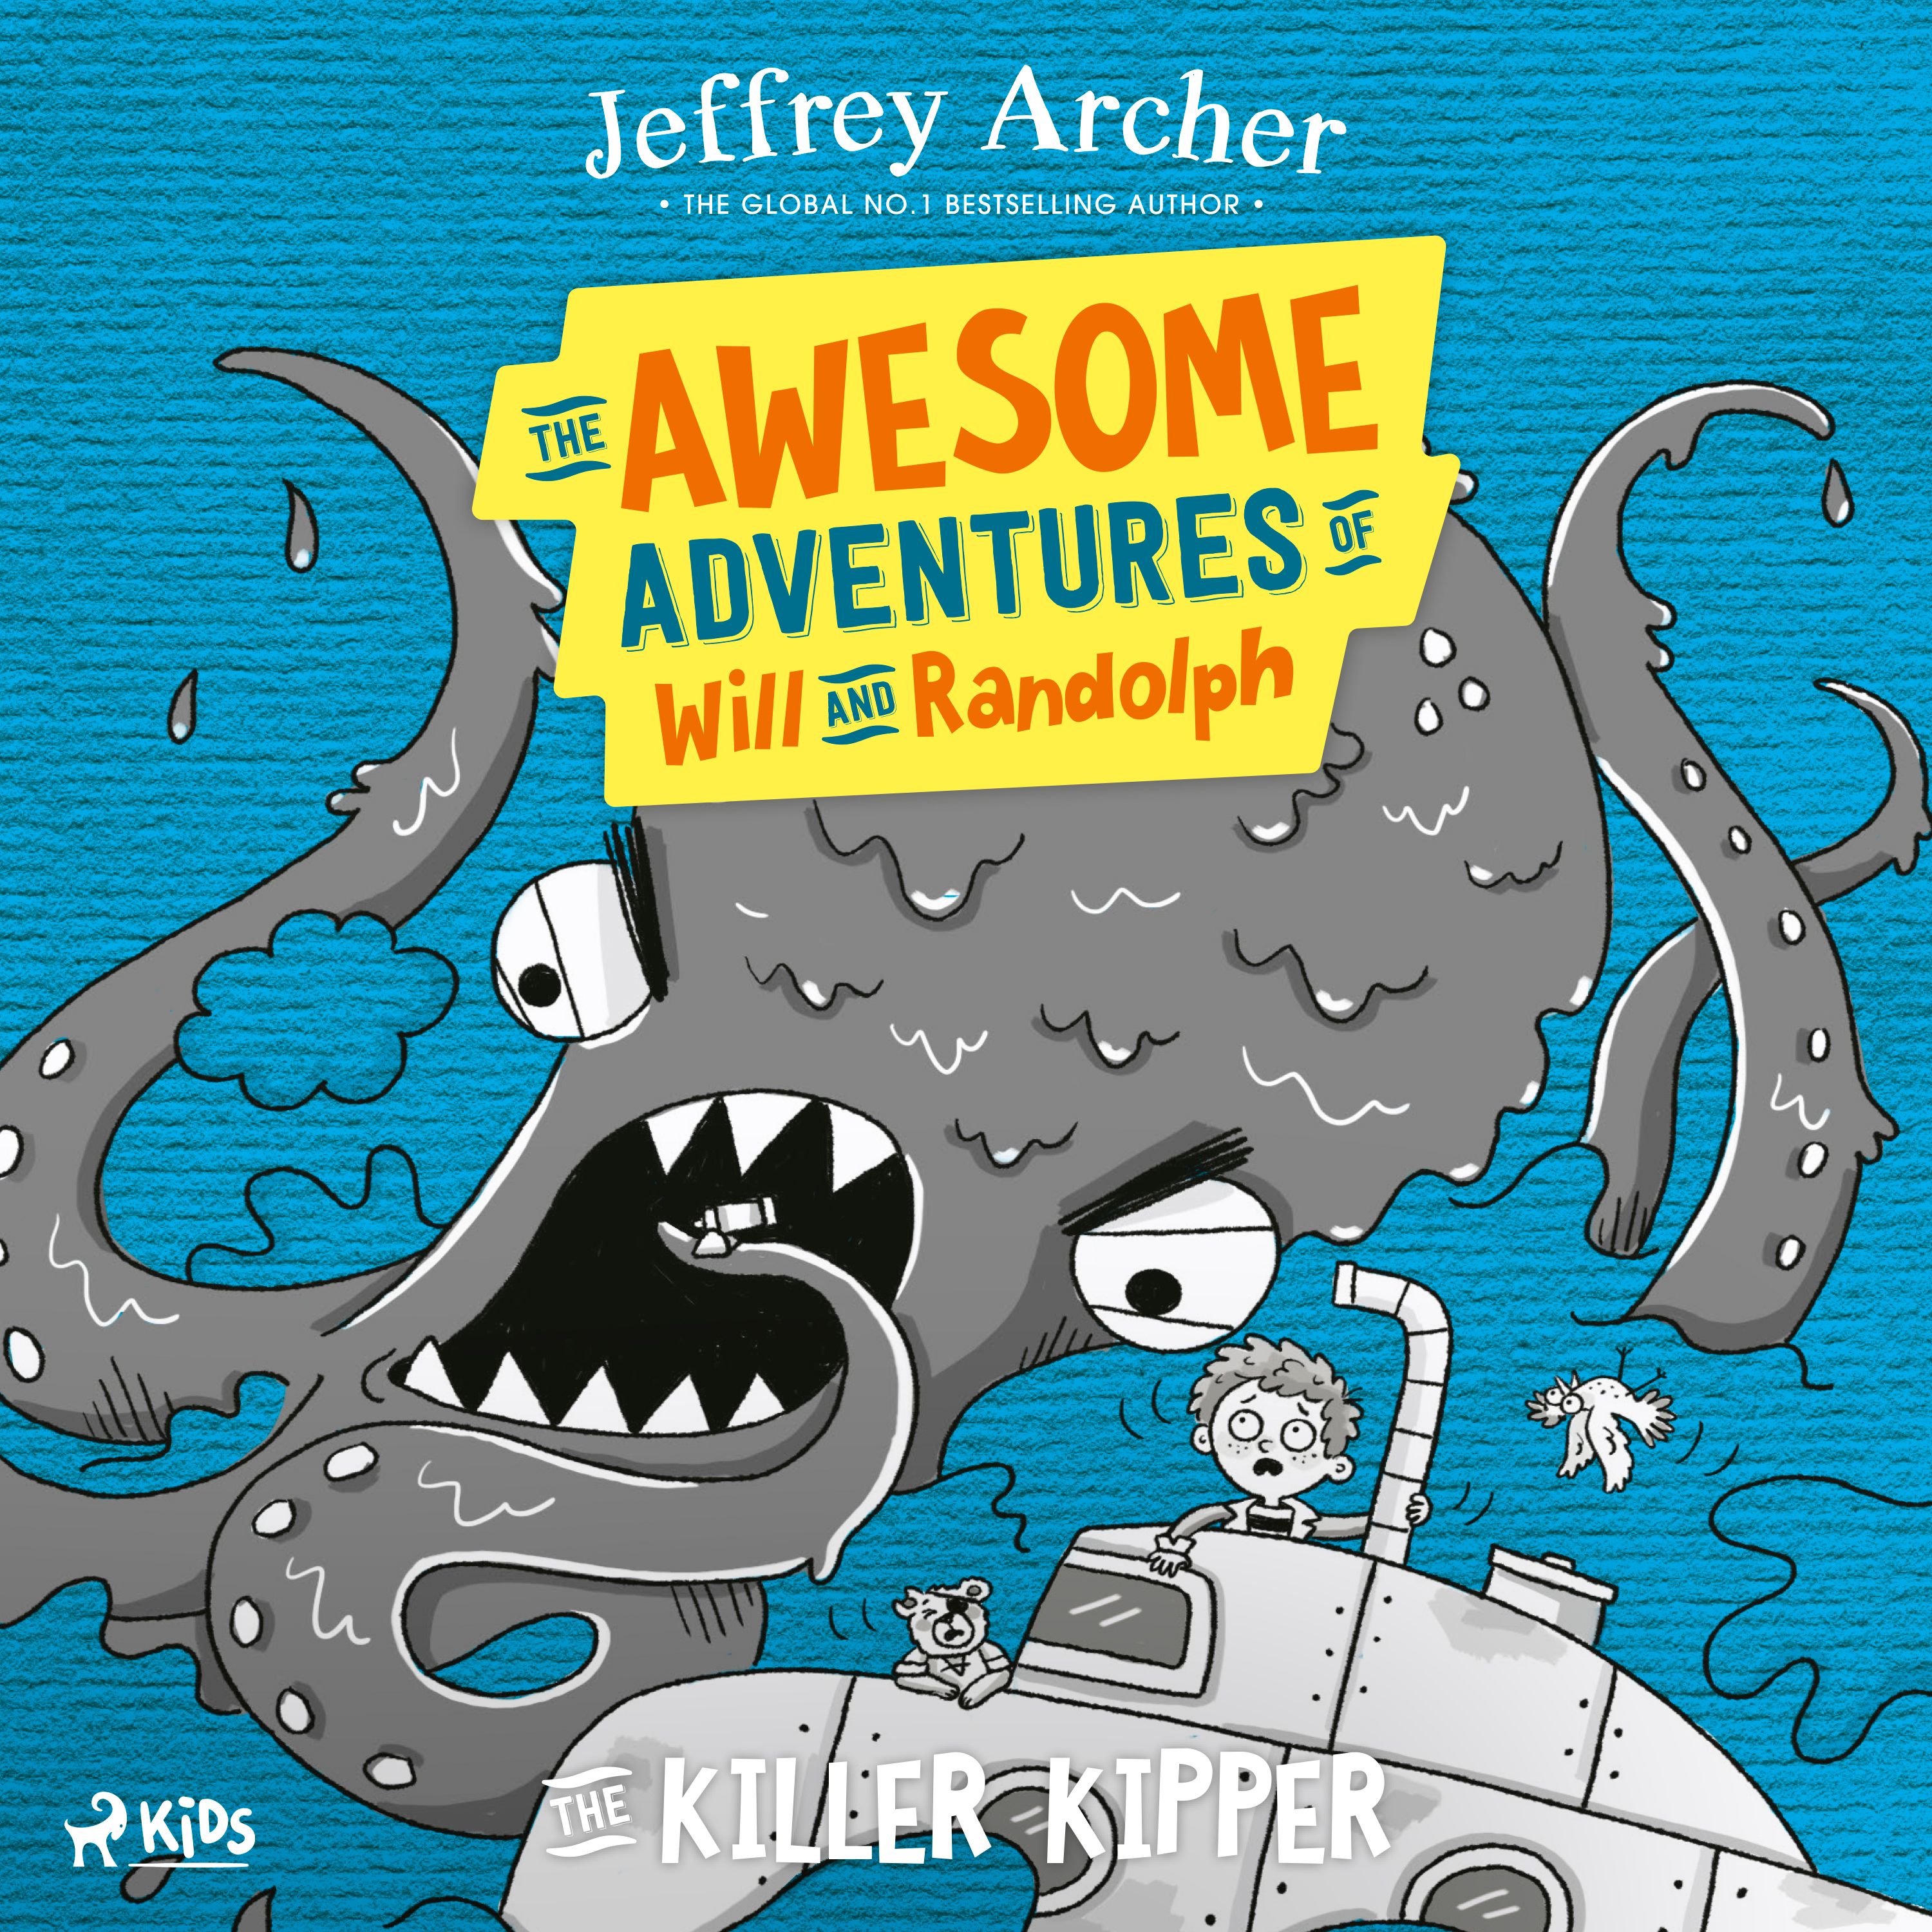 The Awesome Adventures of Will and Randolph: The Killer Kipper, audiobook by Jeffrey Archer